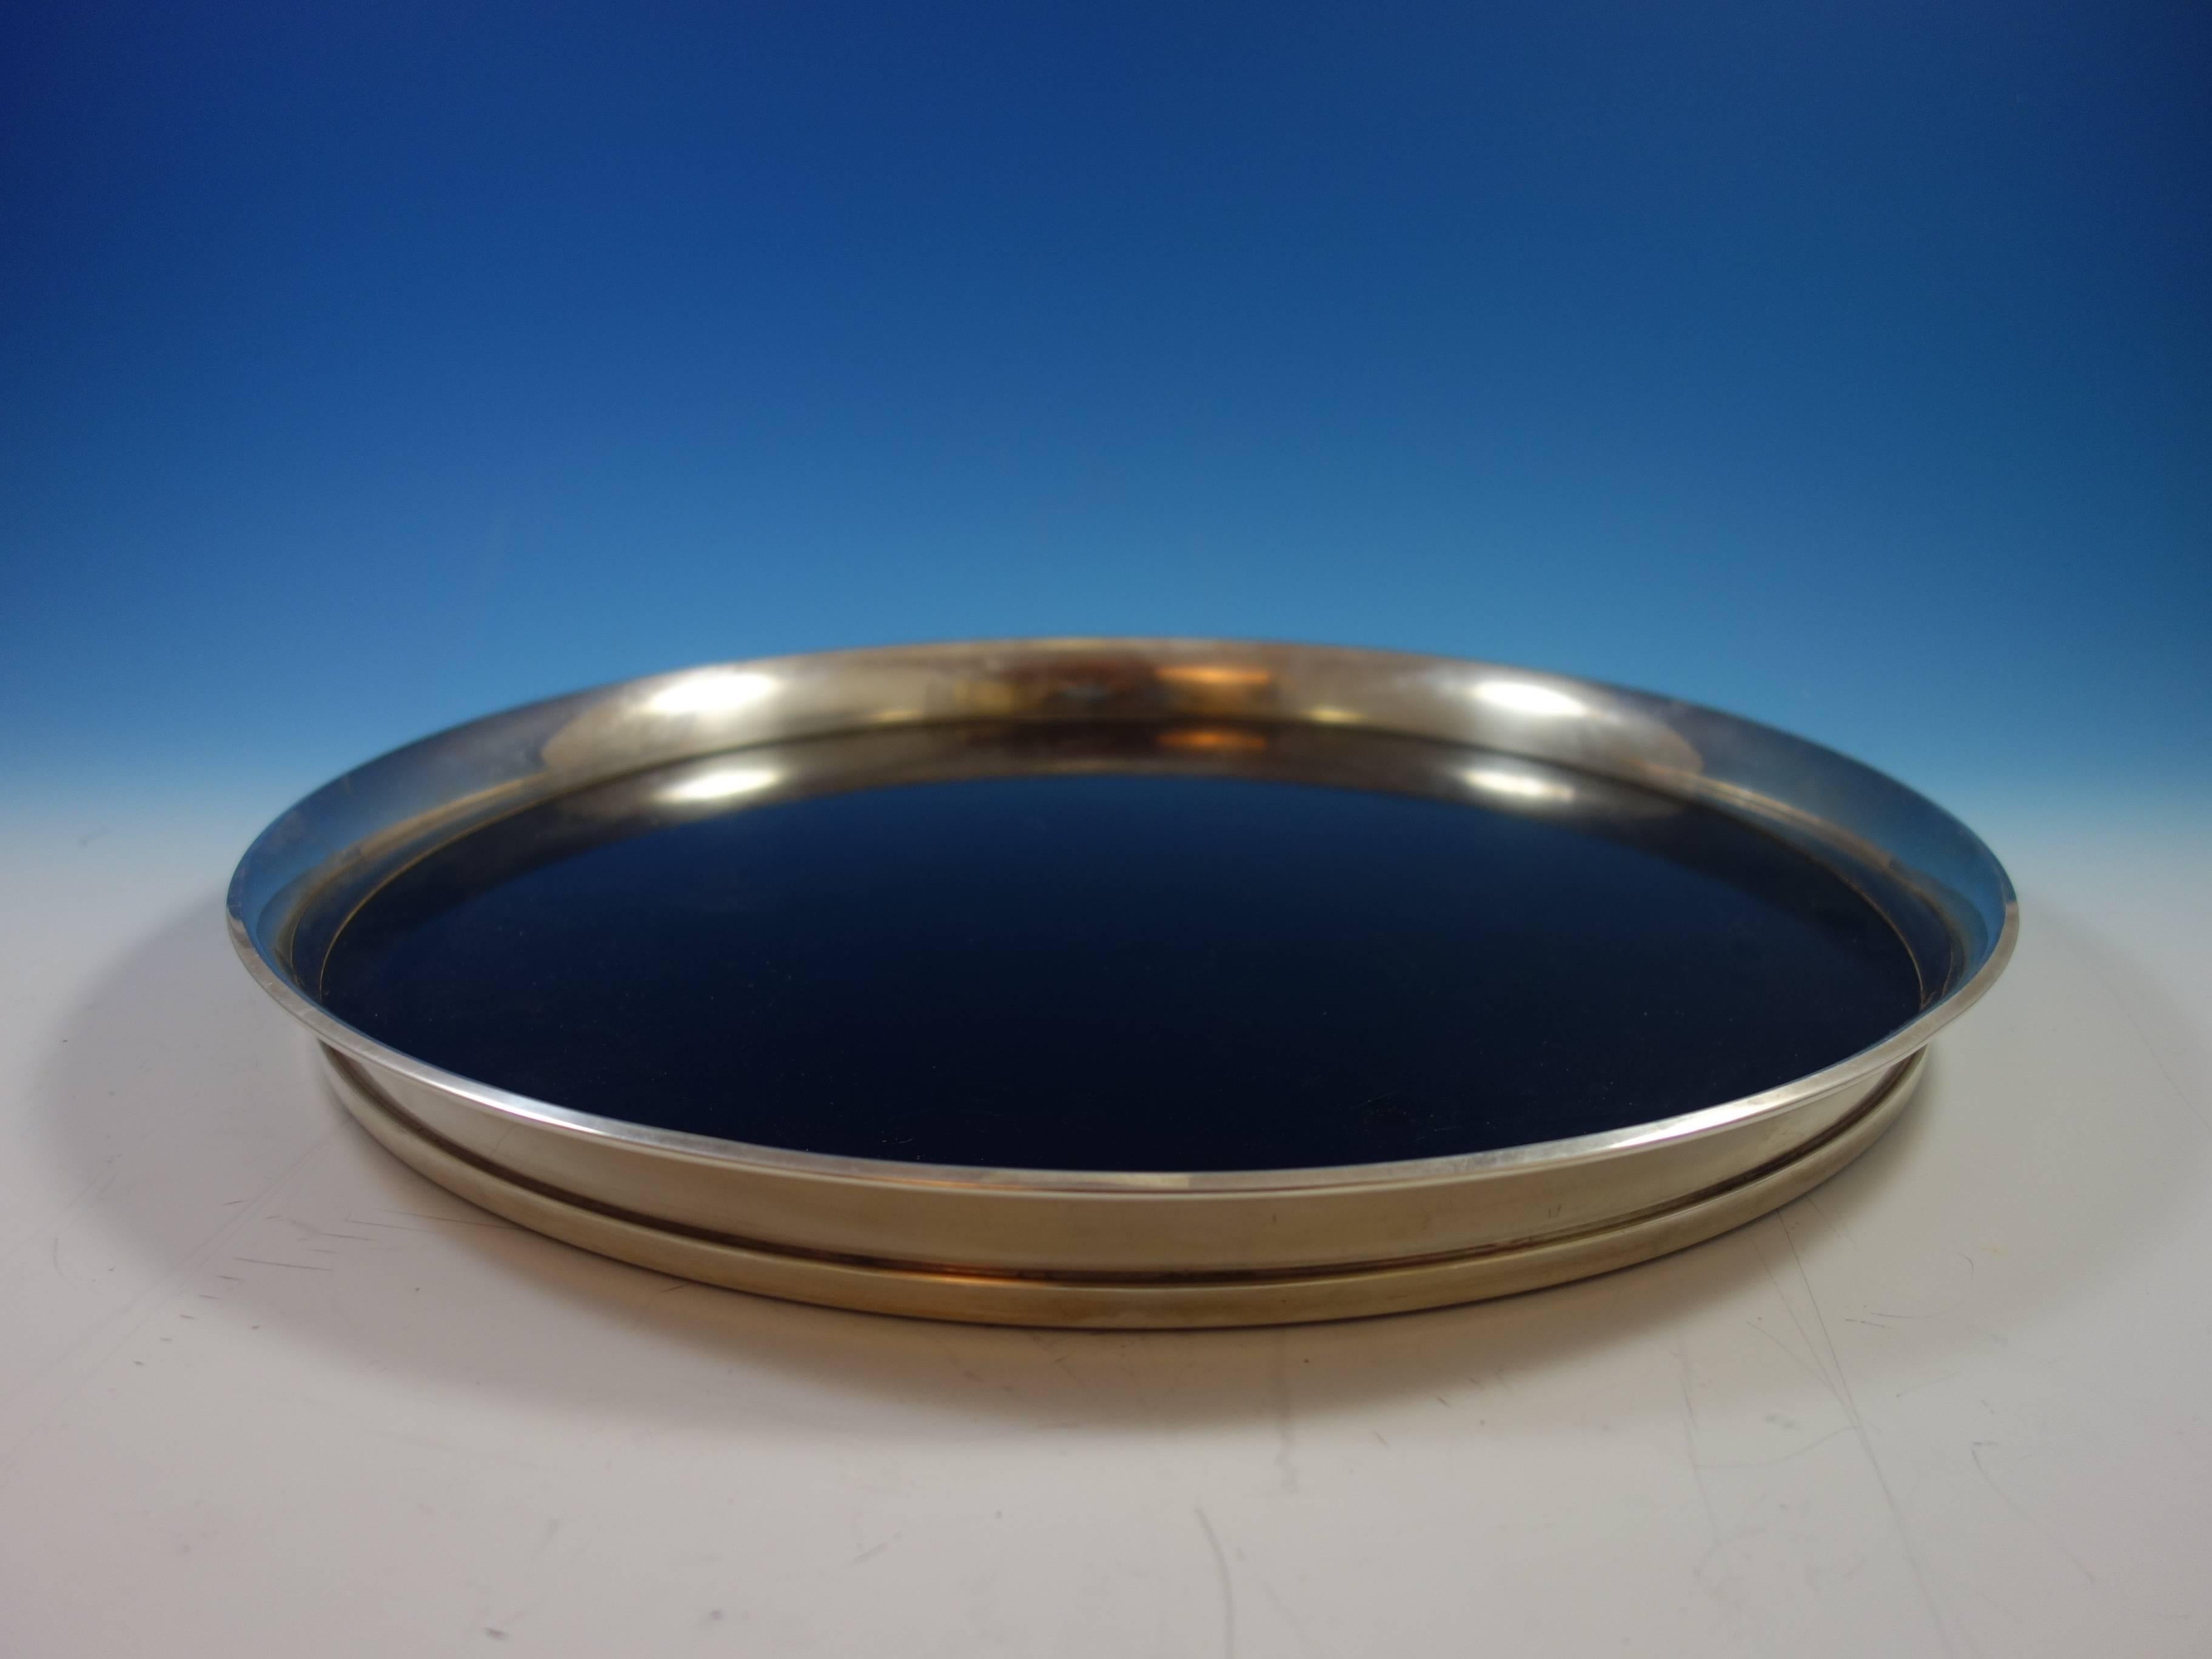 Gorham sterling silver round serving tray with black melamine or laminated plastic centre. This piece is marked #1081-1 and measures 1 1/2